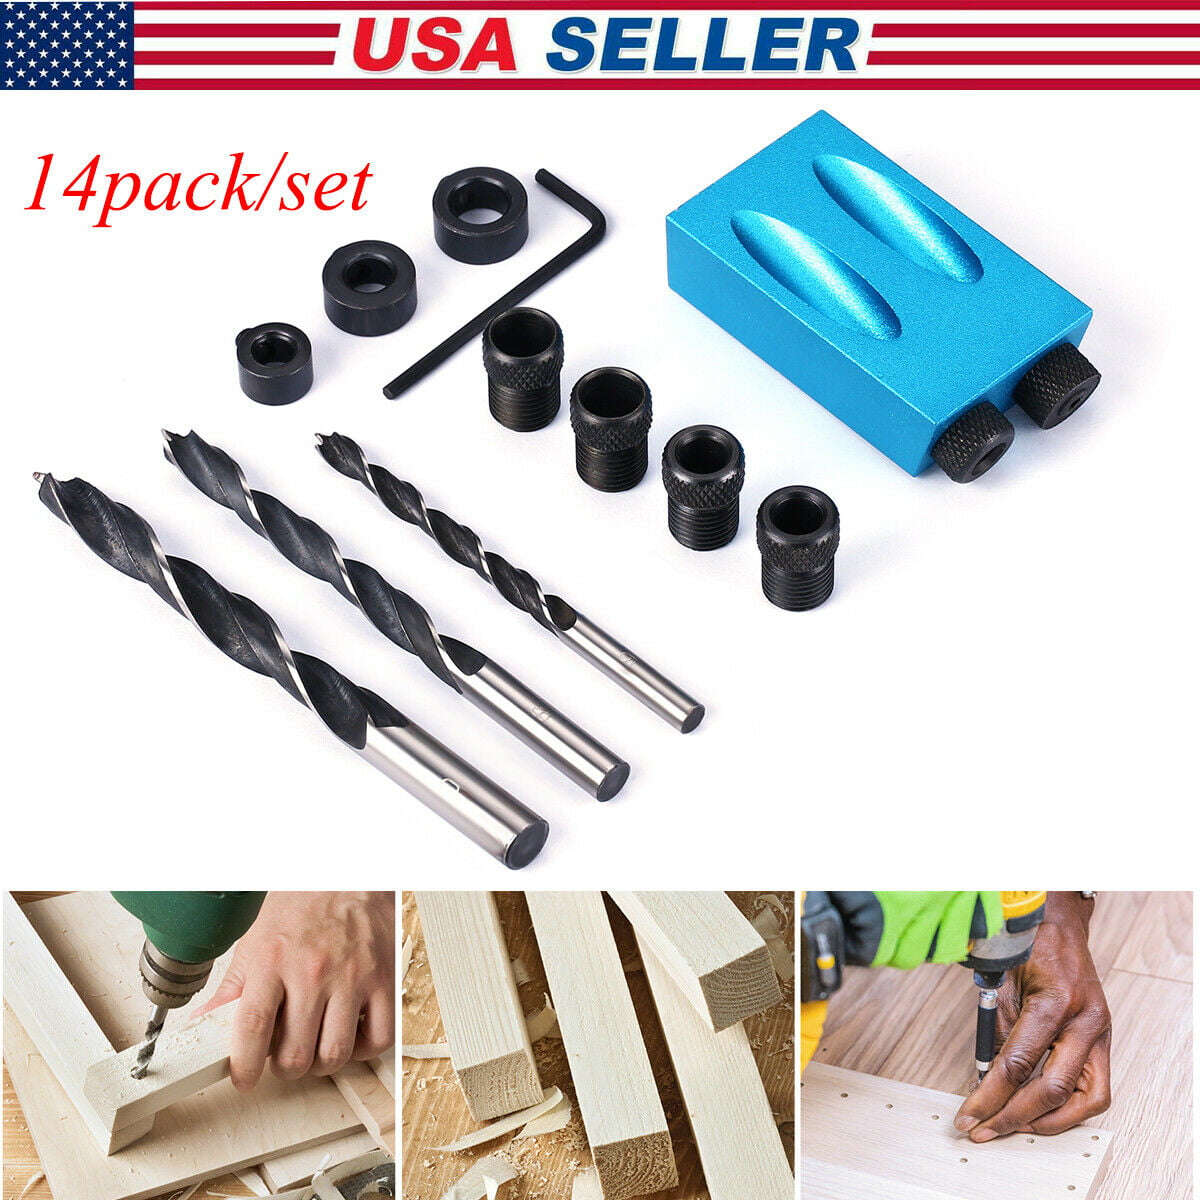 6/8/10mm Pocket Hole Jig Kit Woodworking Guide Oblique Drill Angle Hole Locator. 